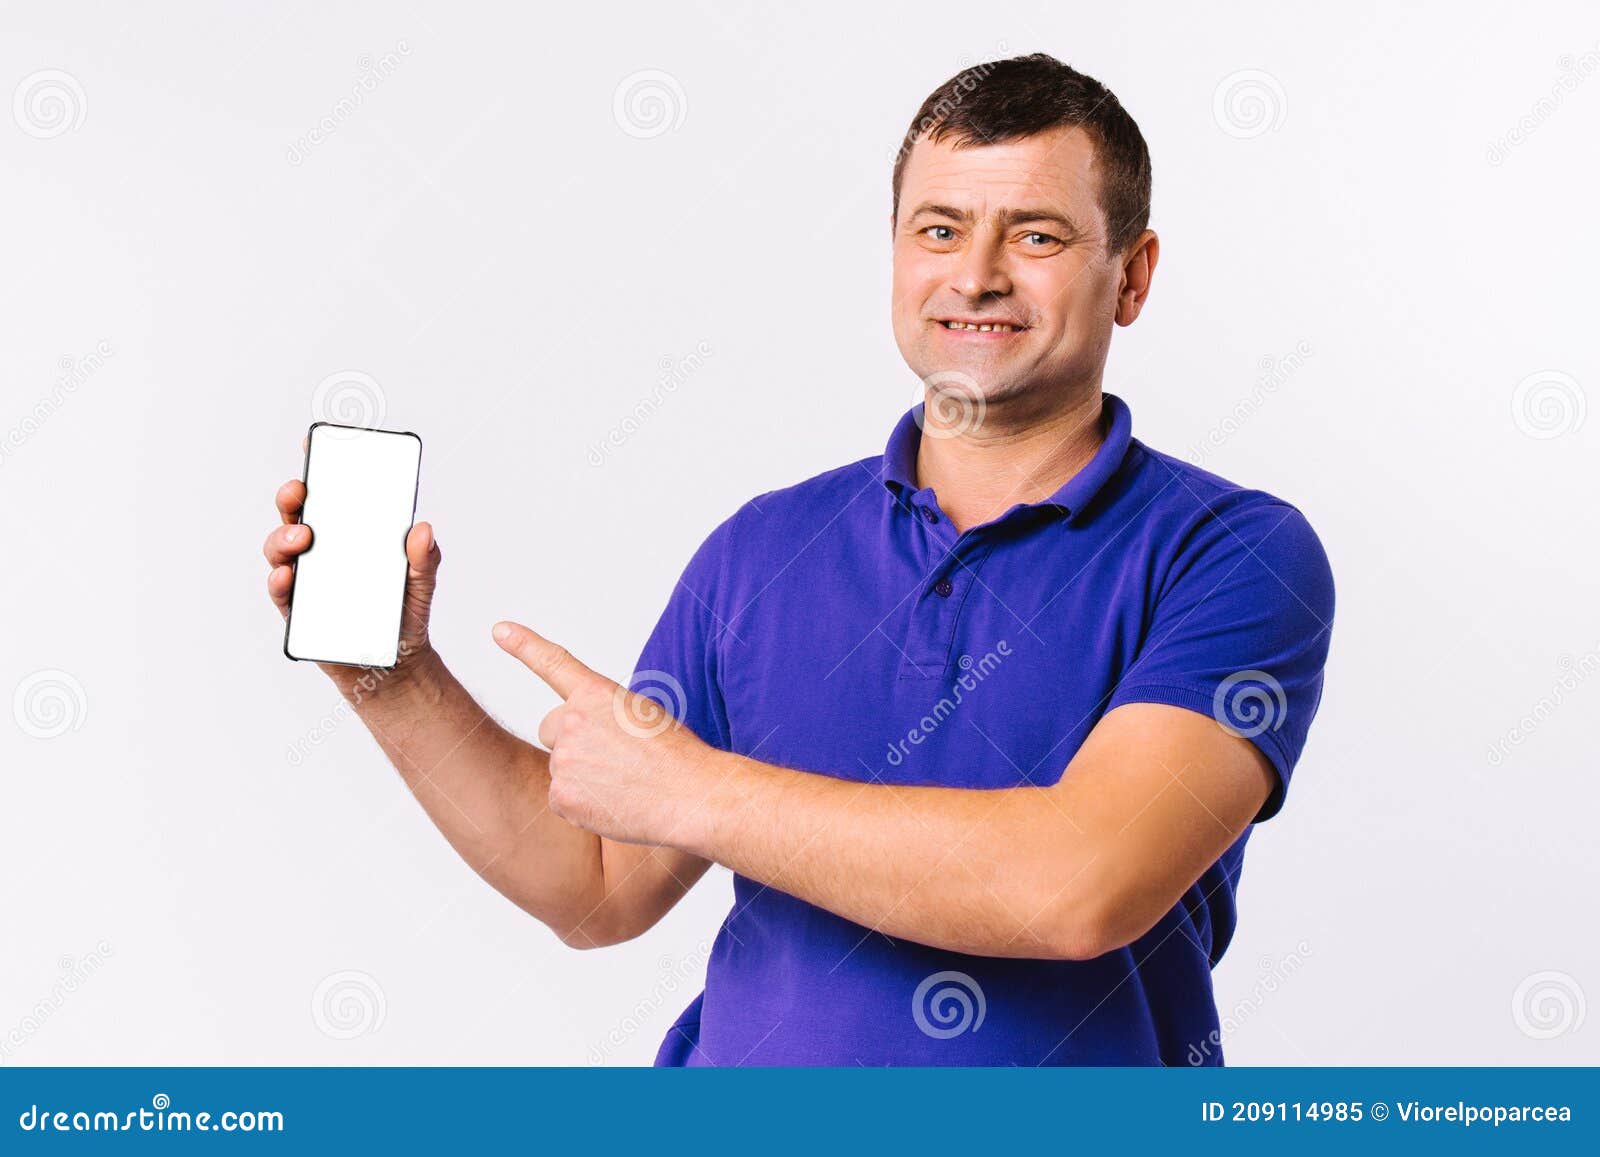 caucasian man in blue t-shirt looks happy at the camera and shows his forefinger at the mocks up smartphone screen. gray